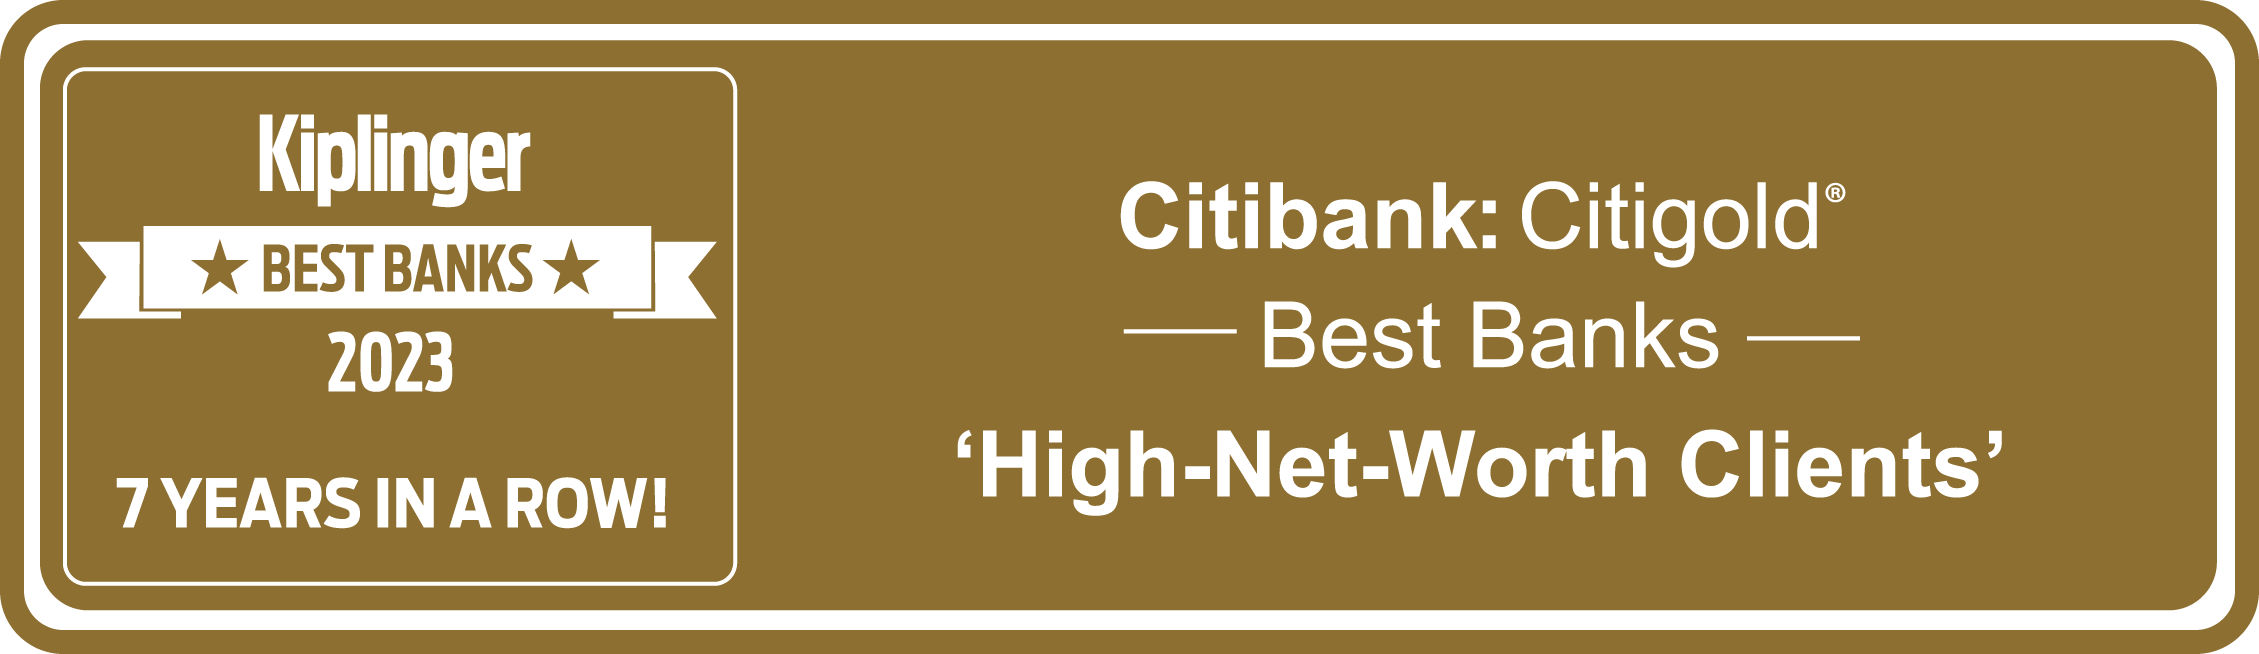 Kiplinger’s best banks, 2023, 7 years in a row, Citibank: Citigold, best high-net-worth families’ bank